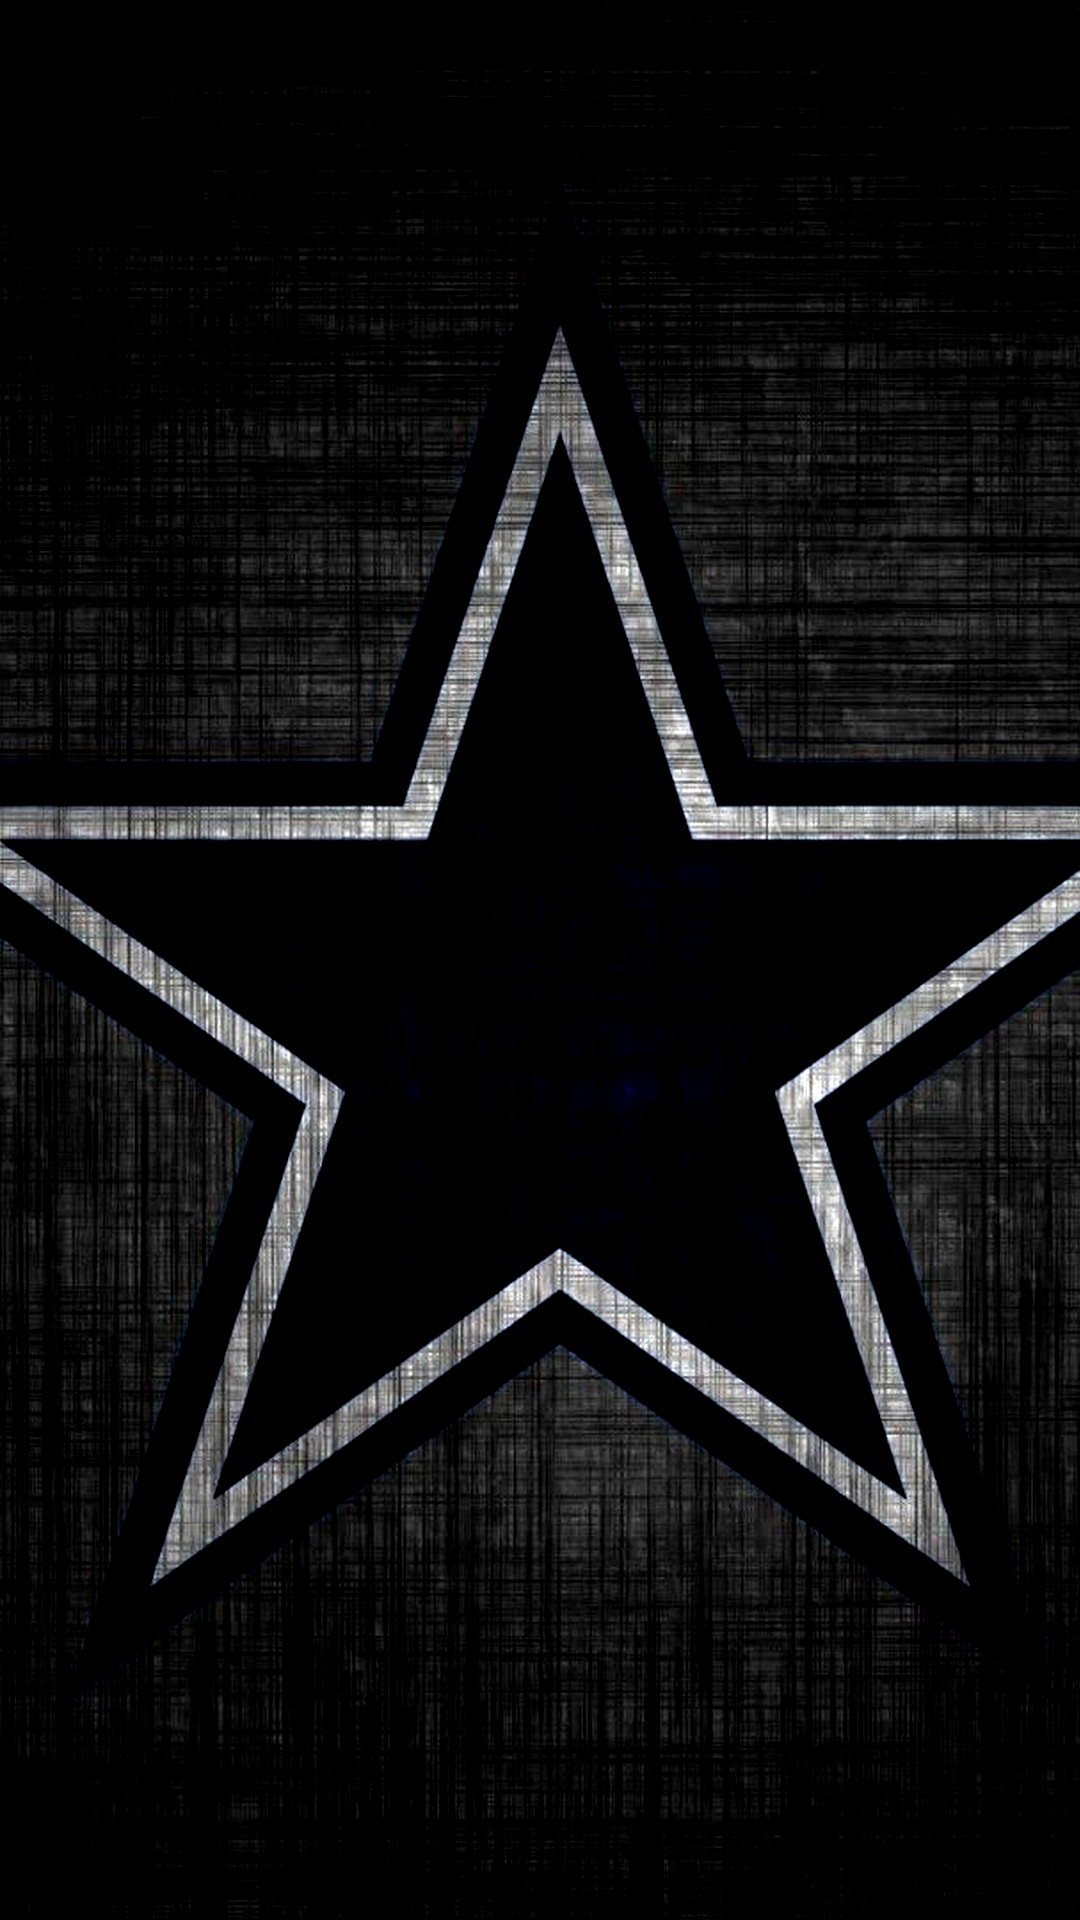 Dallas Cowboys Android Wallpaper with high-resolution 1080x1920 pixel. You can use this wallpaper for your Android backgrounds, Tablet, Samsung Screensavers, Mobile Phone Lock Screen and another Smartphones device